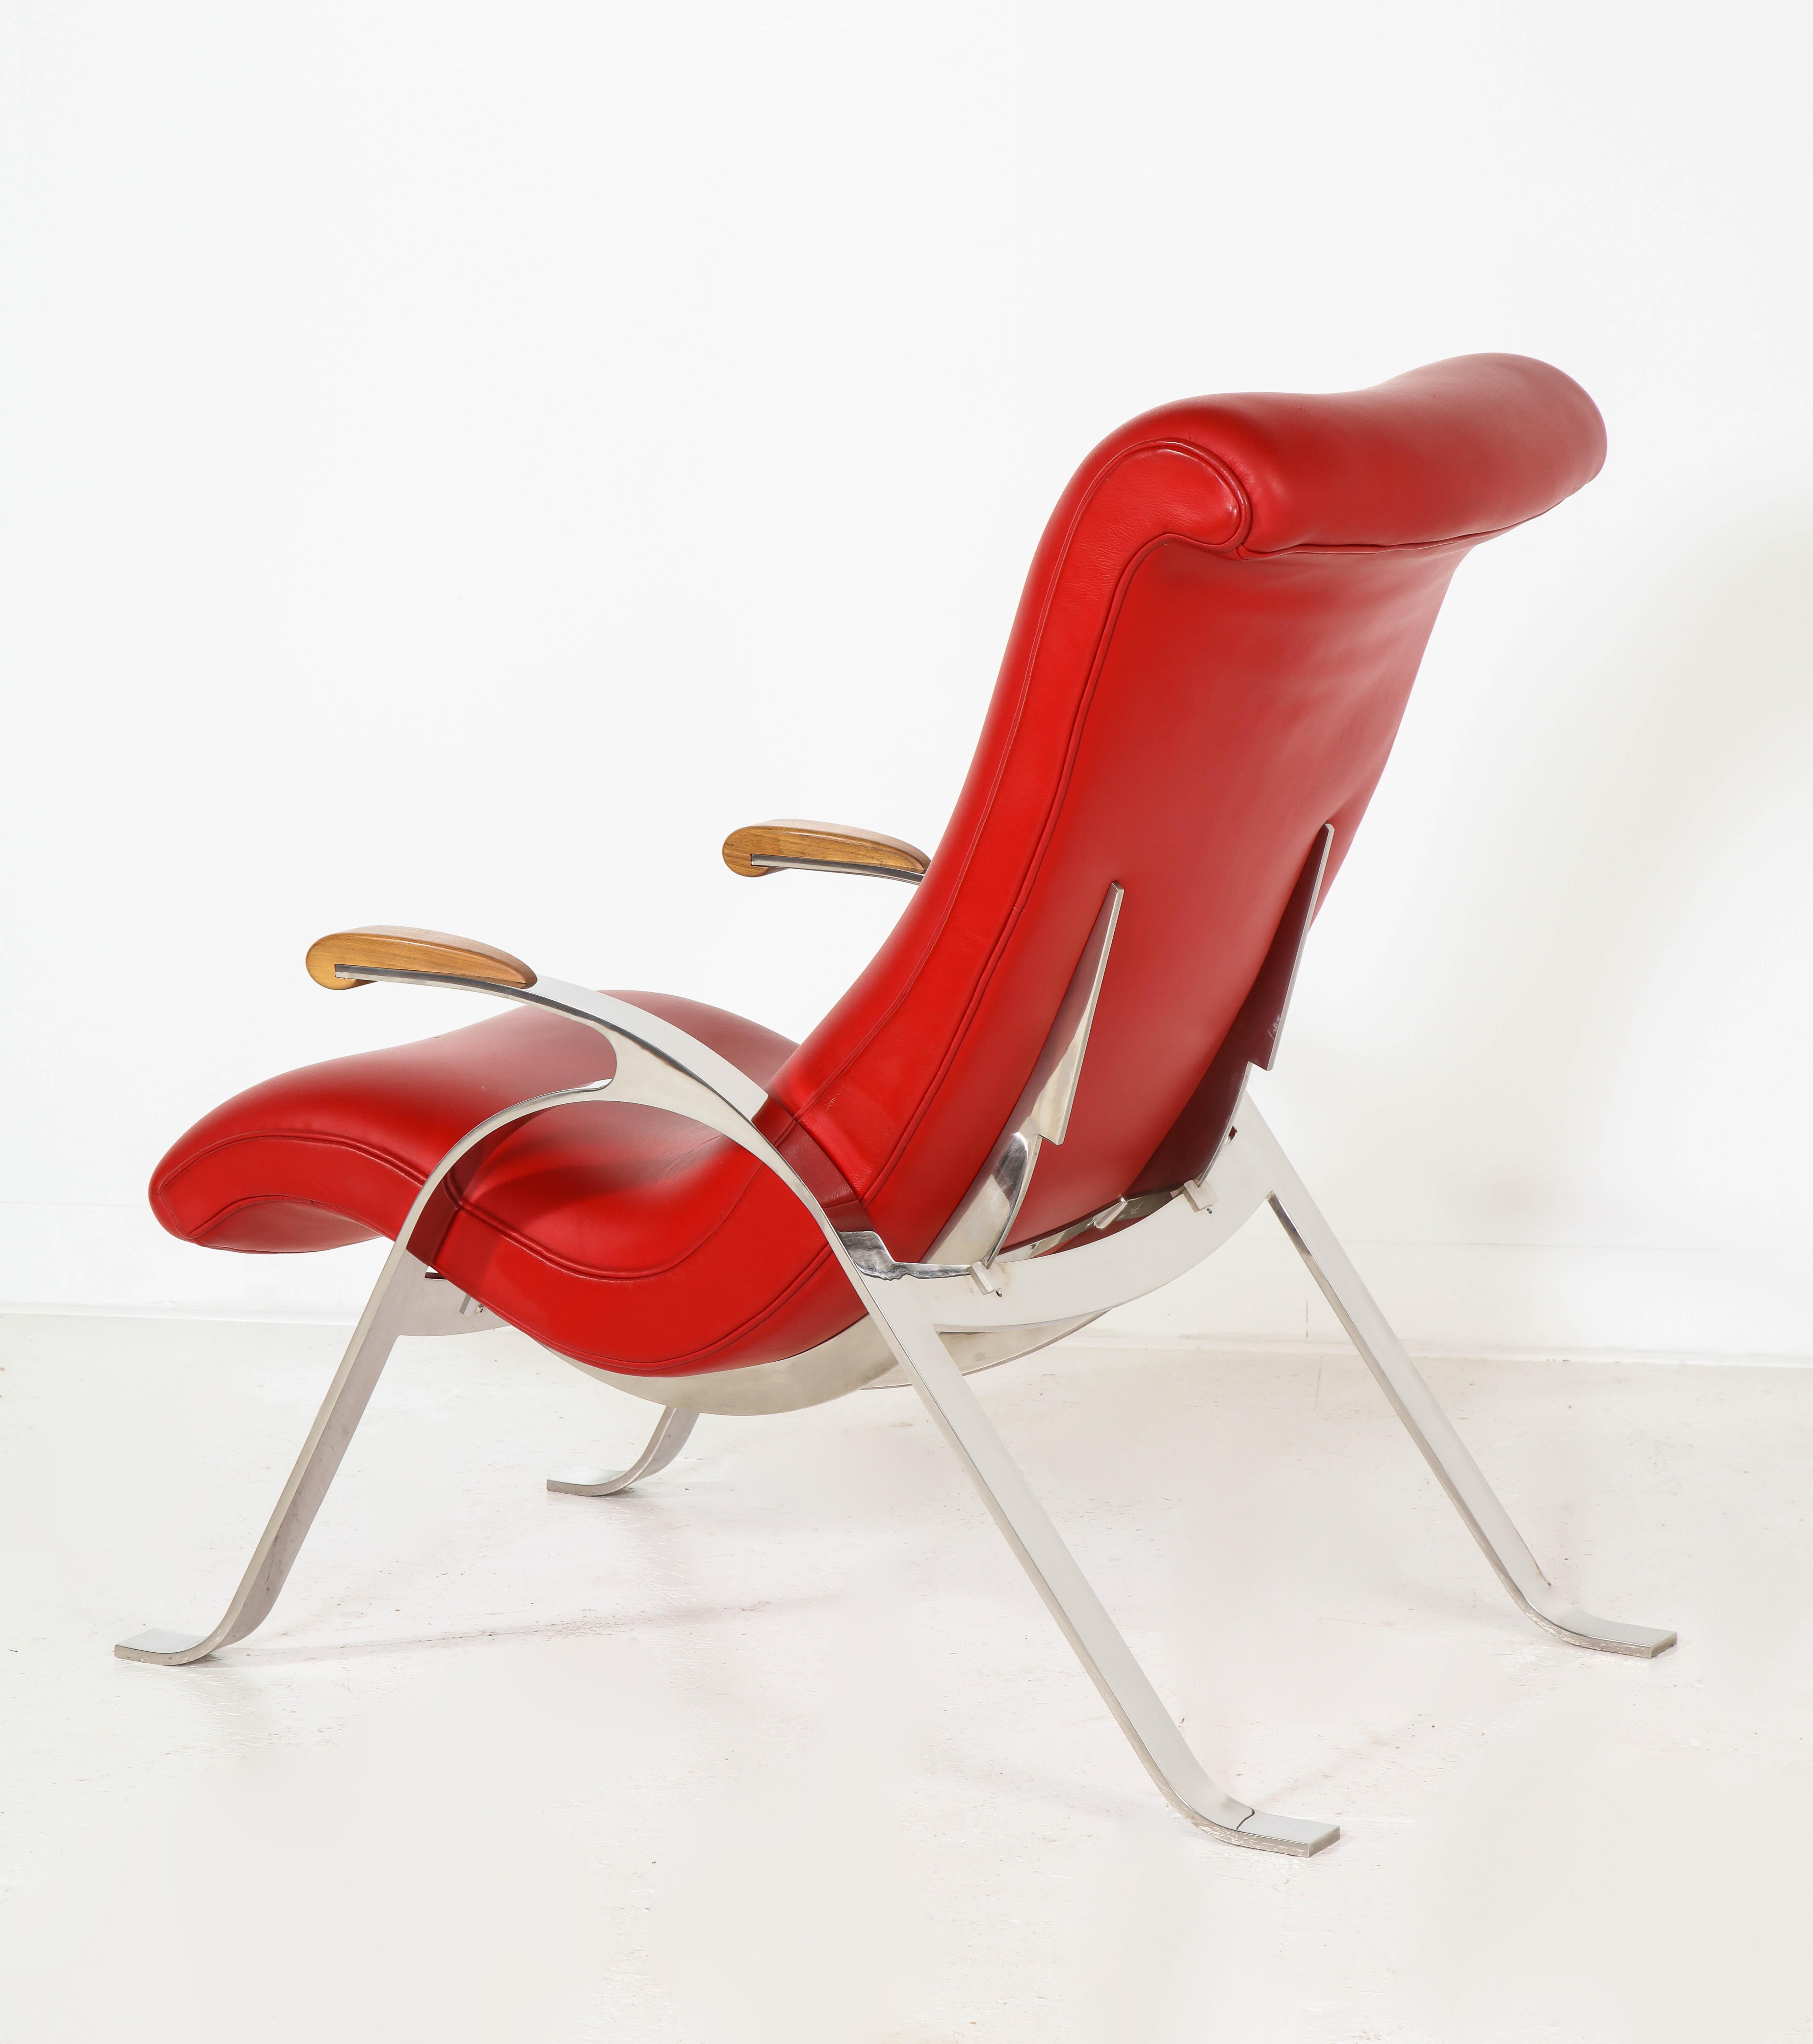 Multi-Position Reclining Chair in Red Offered by Vladimir Kagan Design Group In Good Condition For Sale In Clifton, NJ